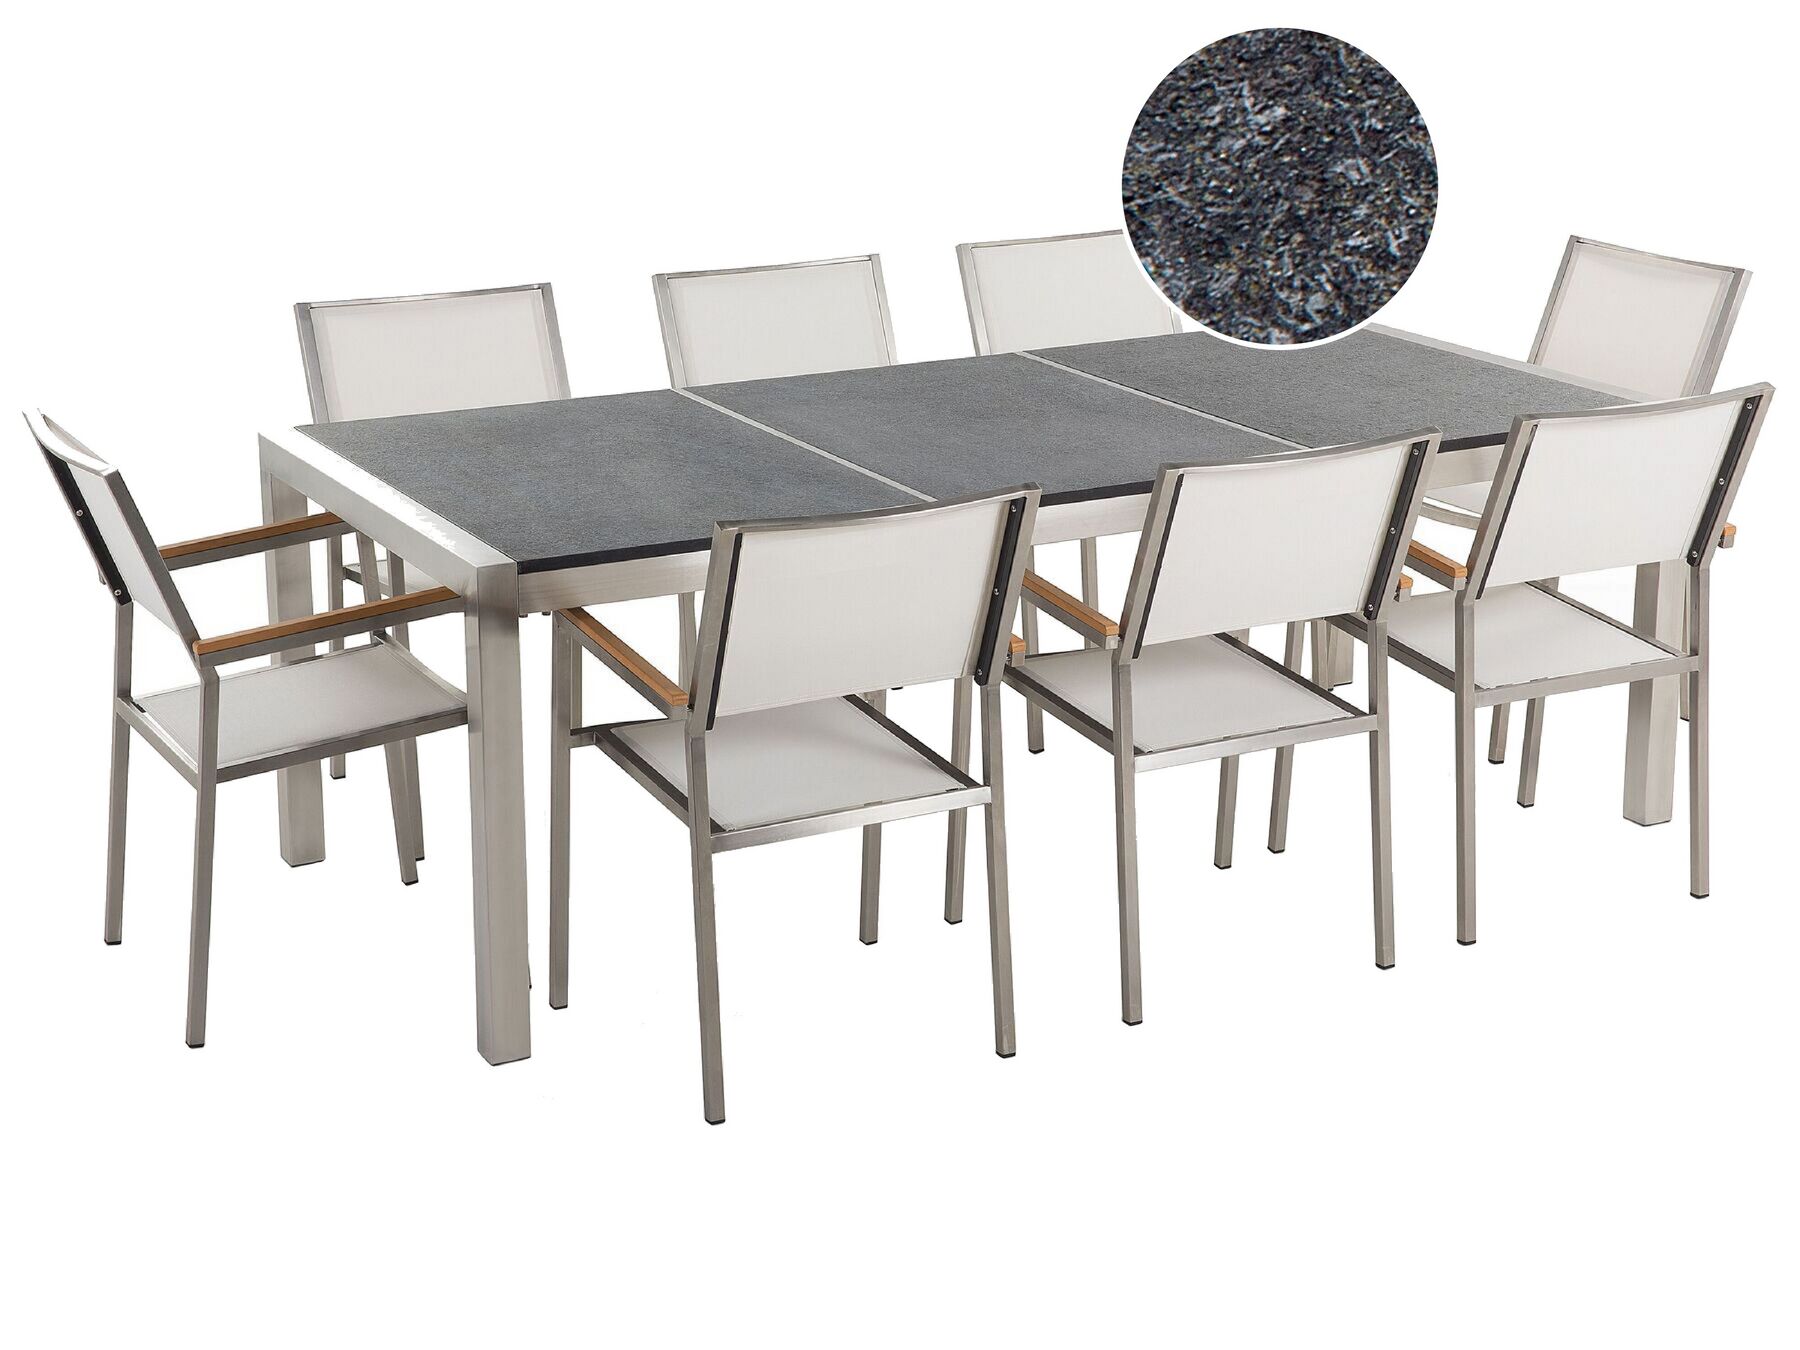 8 Seater Garden Dining Set Black Granite Triple Plate Top with White Chairs GROSSETO_379916